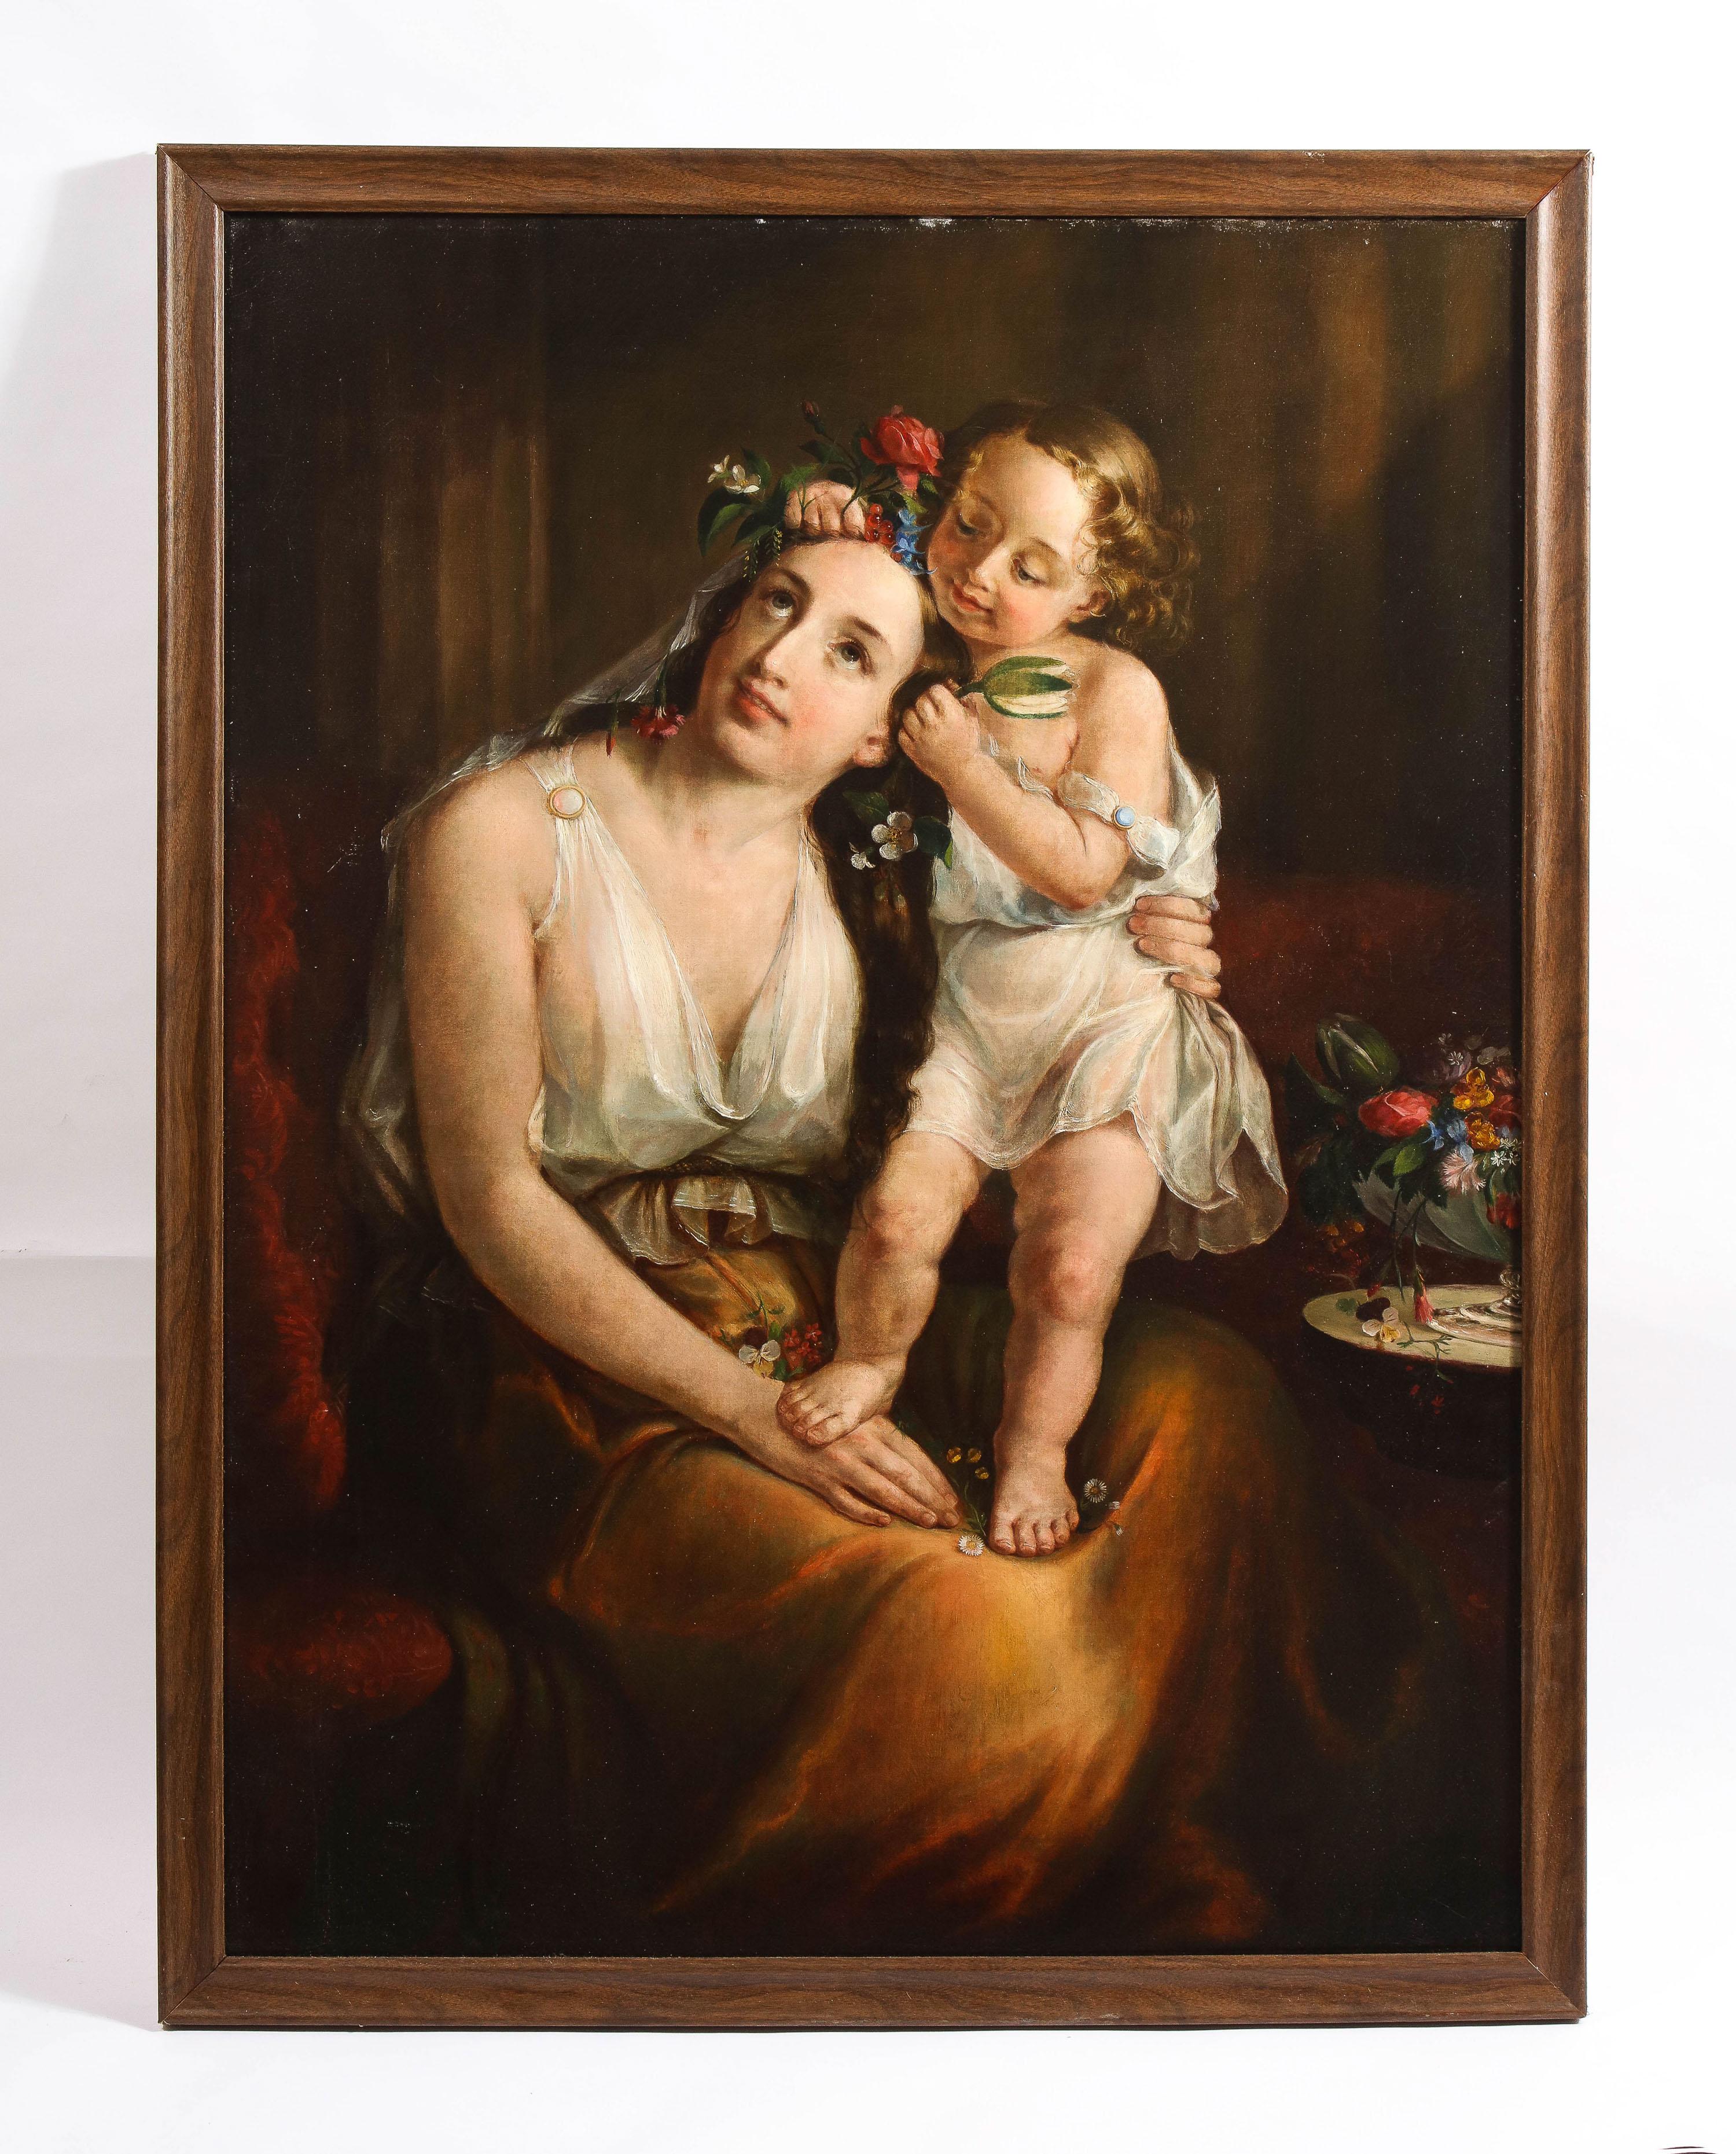 american artist known for portrait of his mother